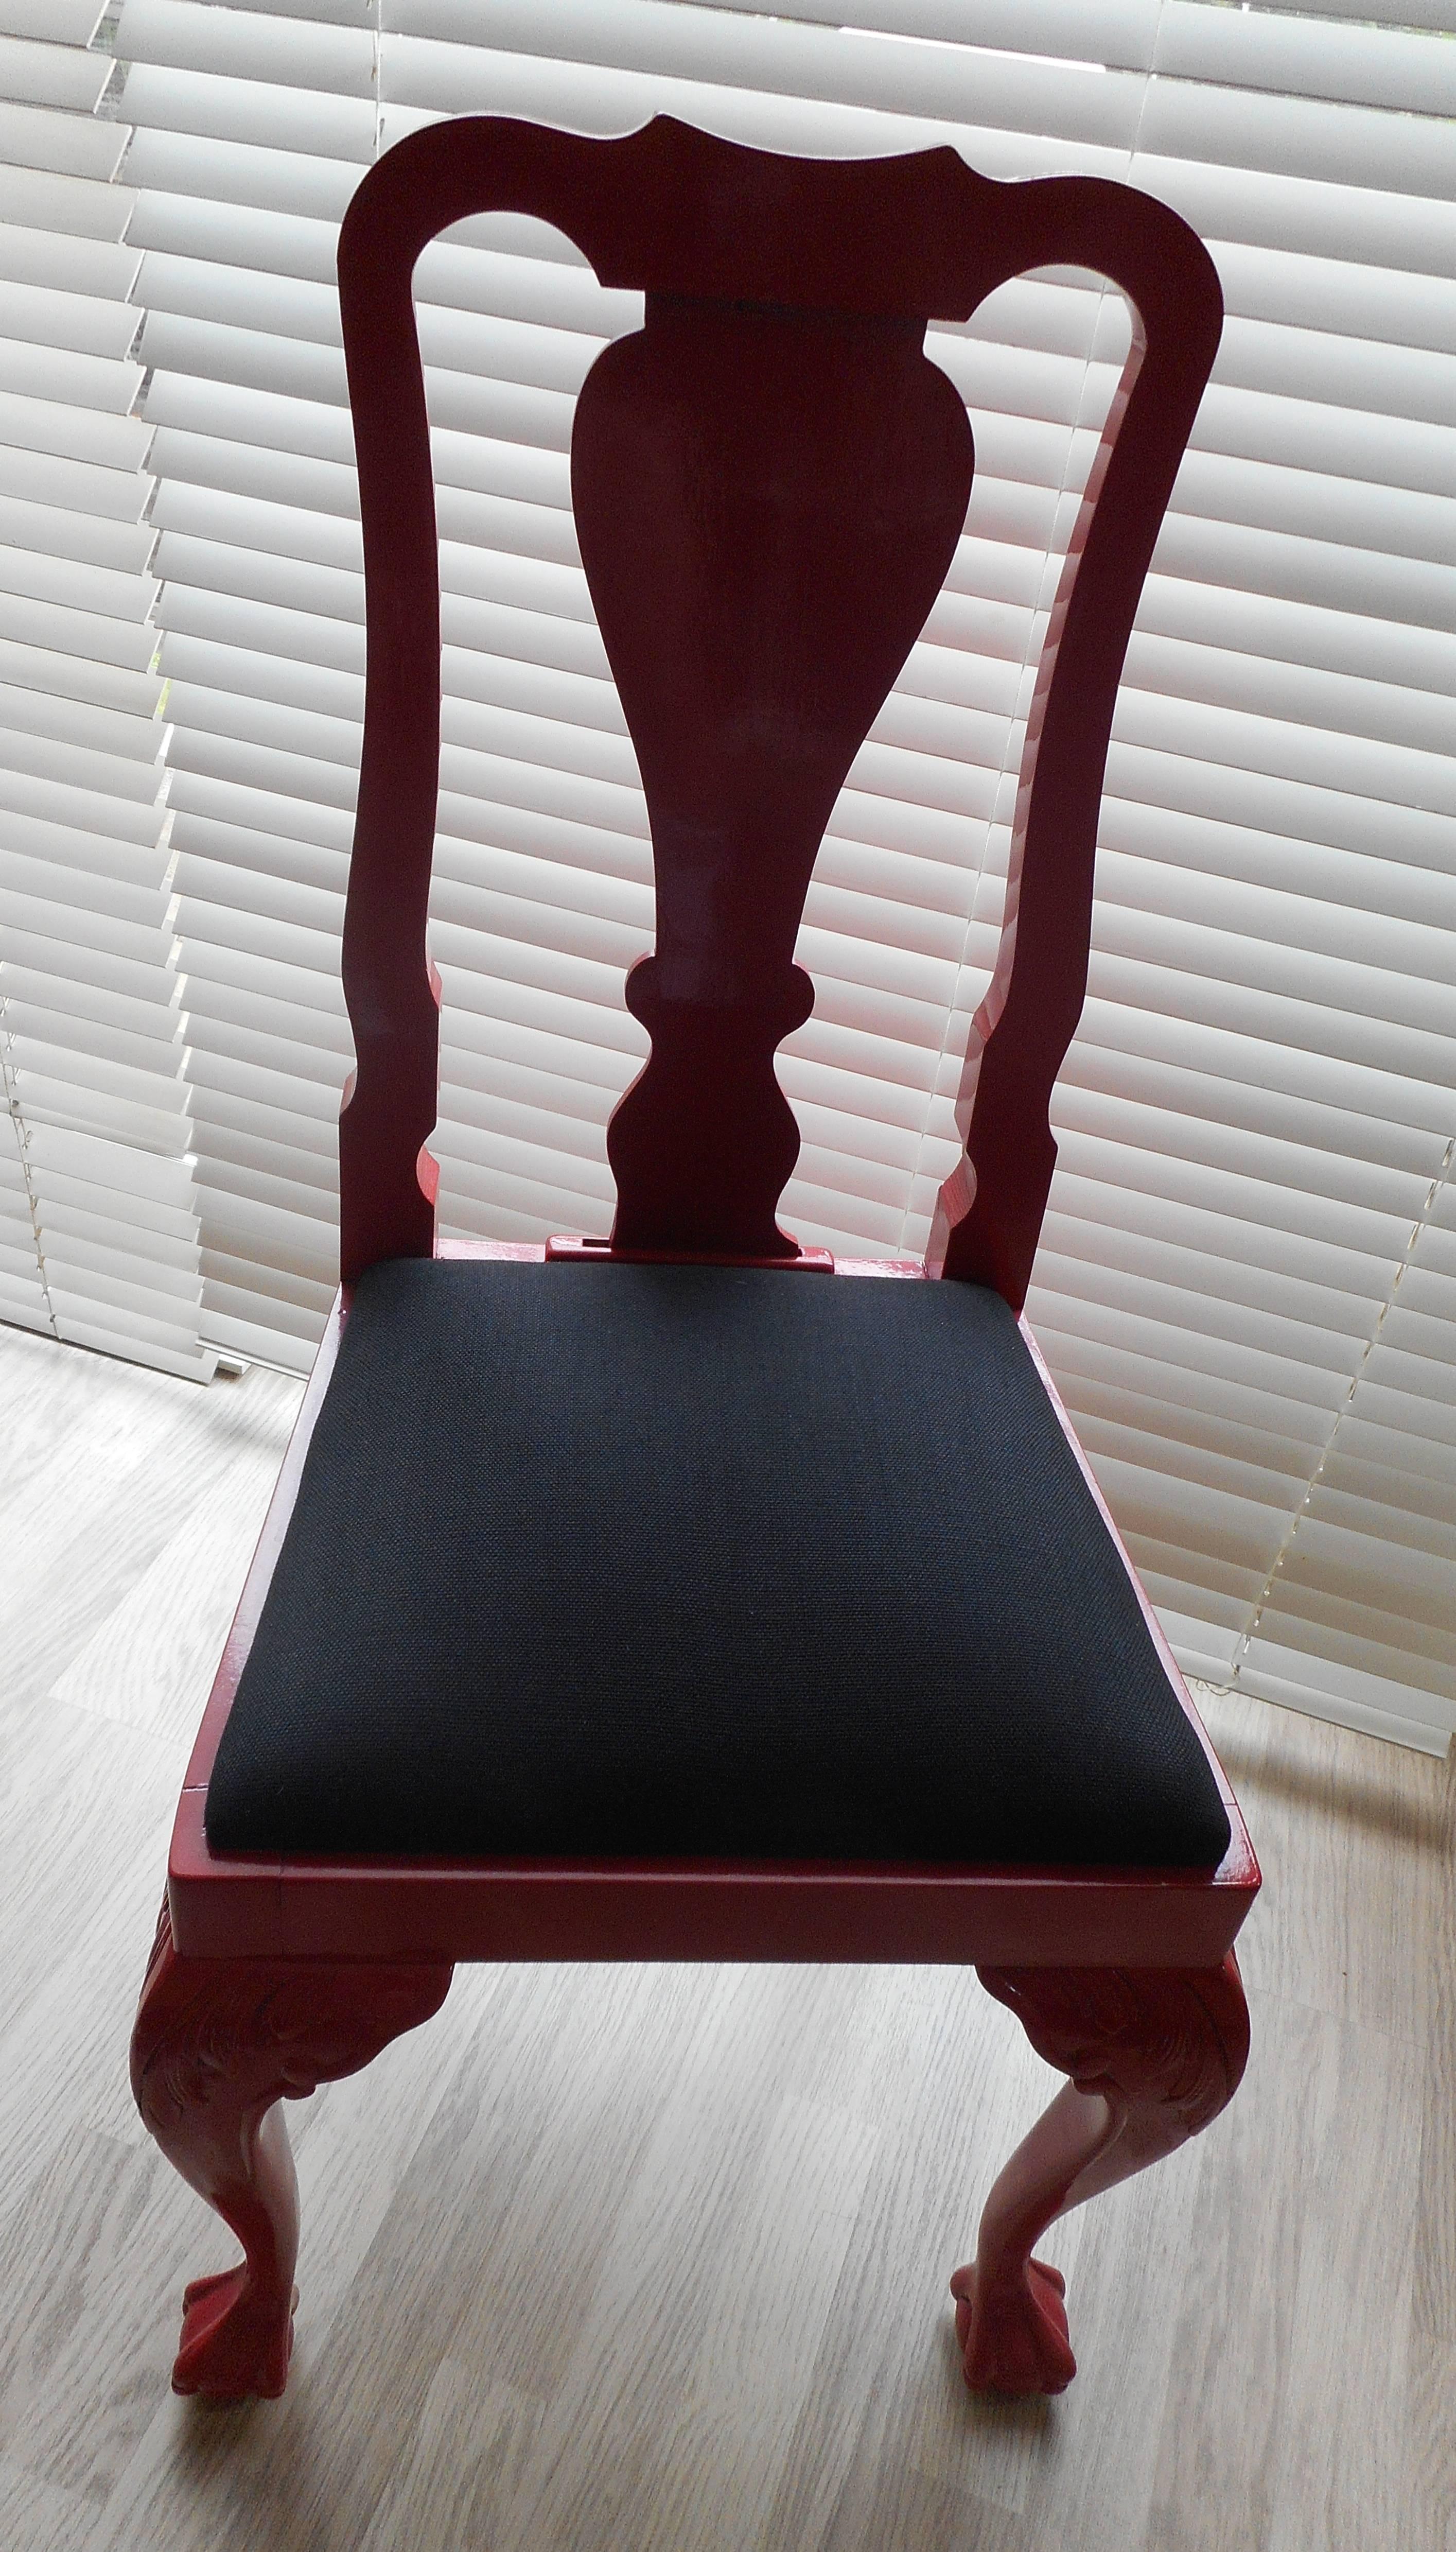 Belgian Six Red Lacquer Chairs